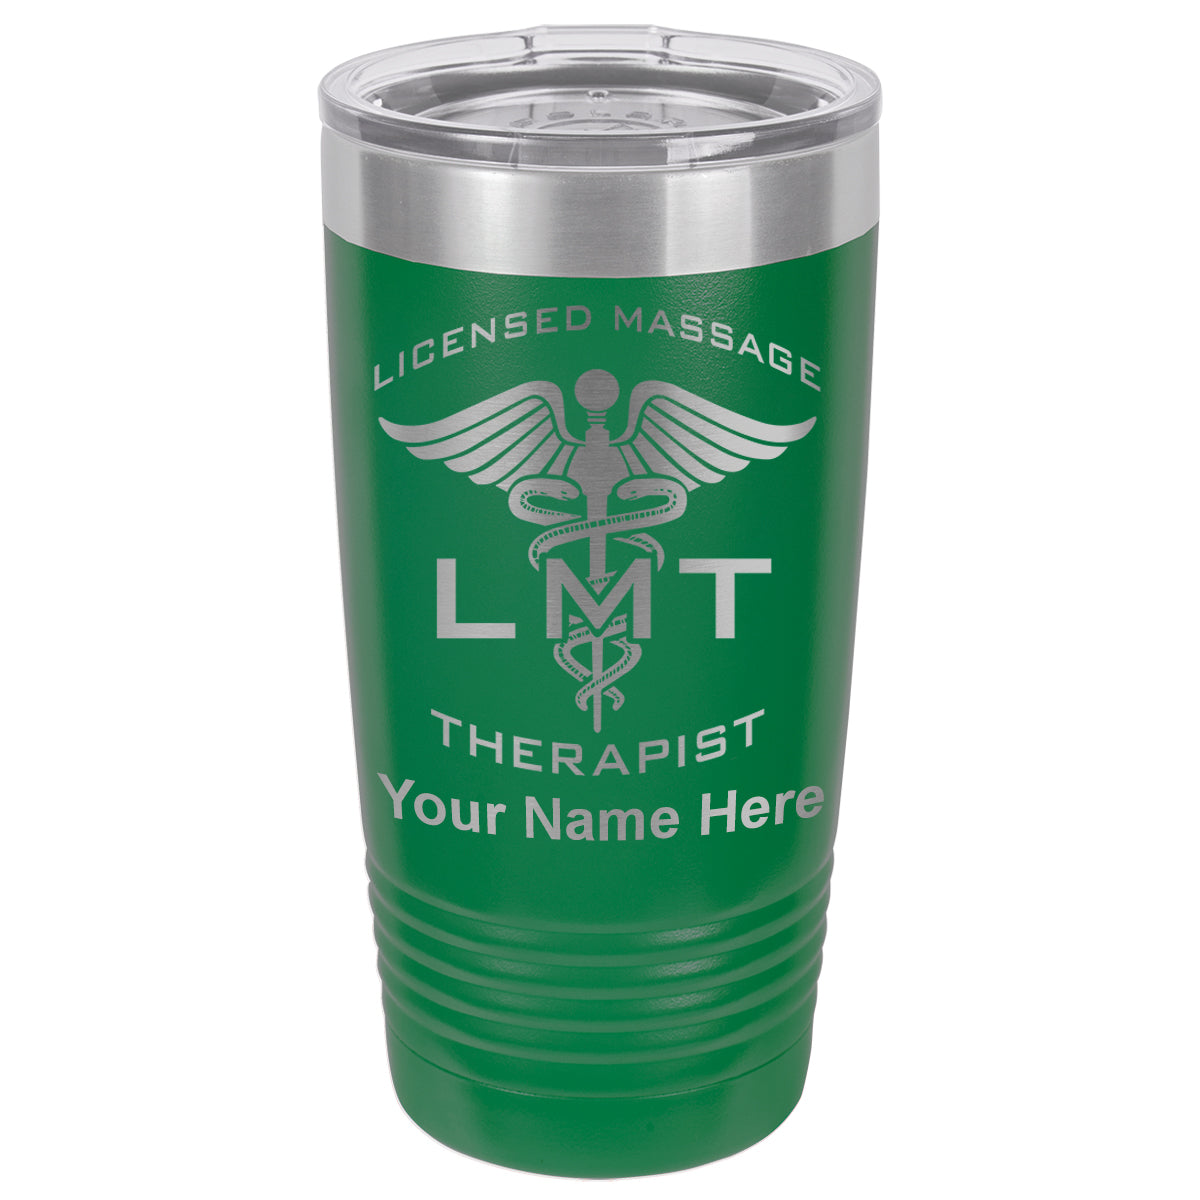 20oz Vacuum Insulated Tumbler Mug, LMT Licensed Massage Therapist, Personalized Engraving Included